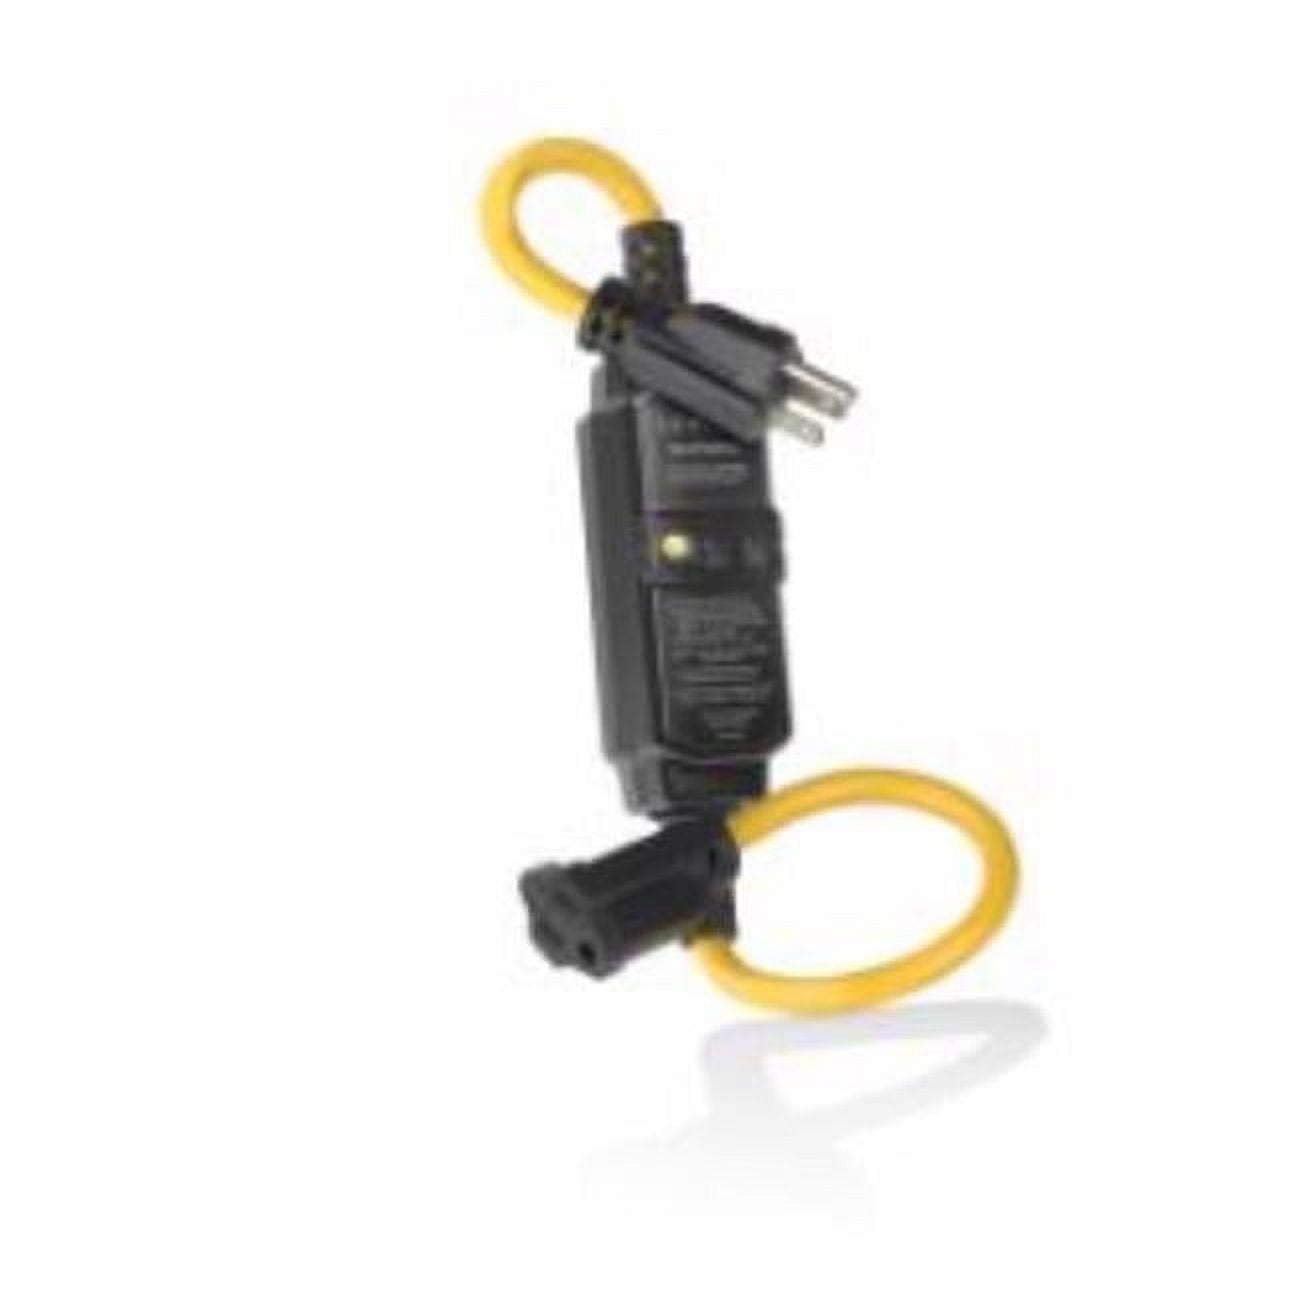 UPC 078477682951 product image for Leviton 3011686 2 ft. 14-3 SJTW Indoor or Outdoor Black GFCI Extension Cord | upcitemdb.com